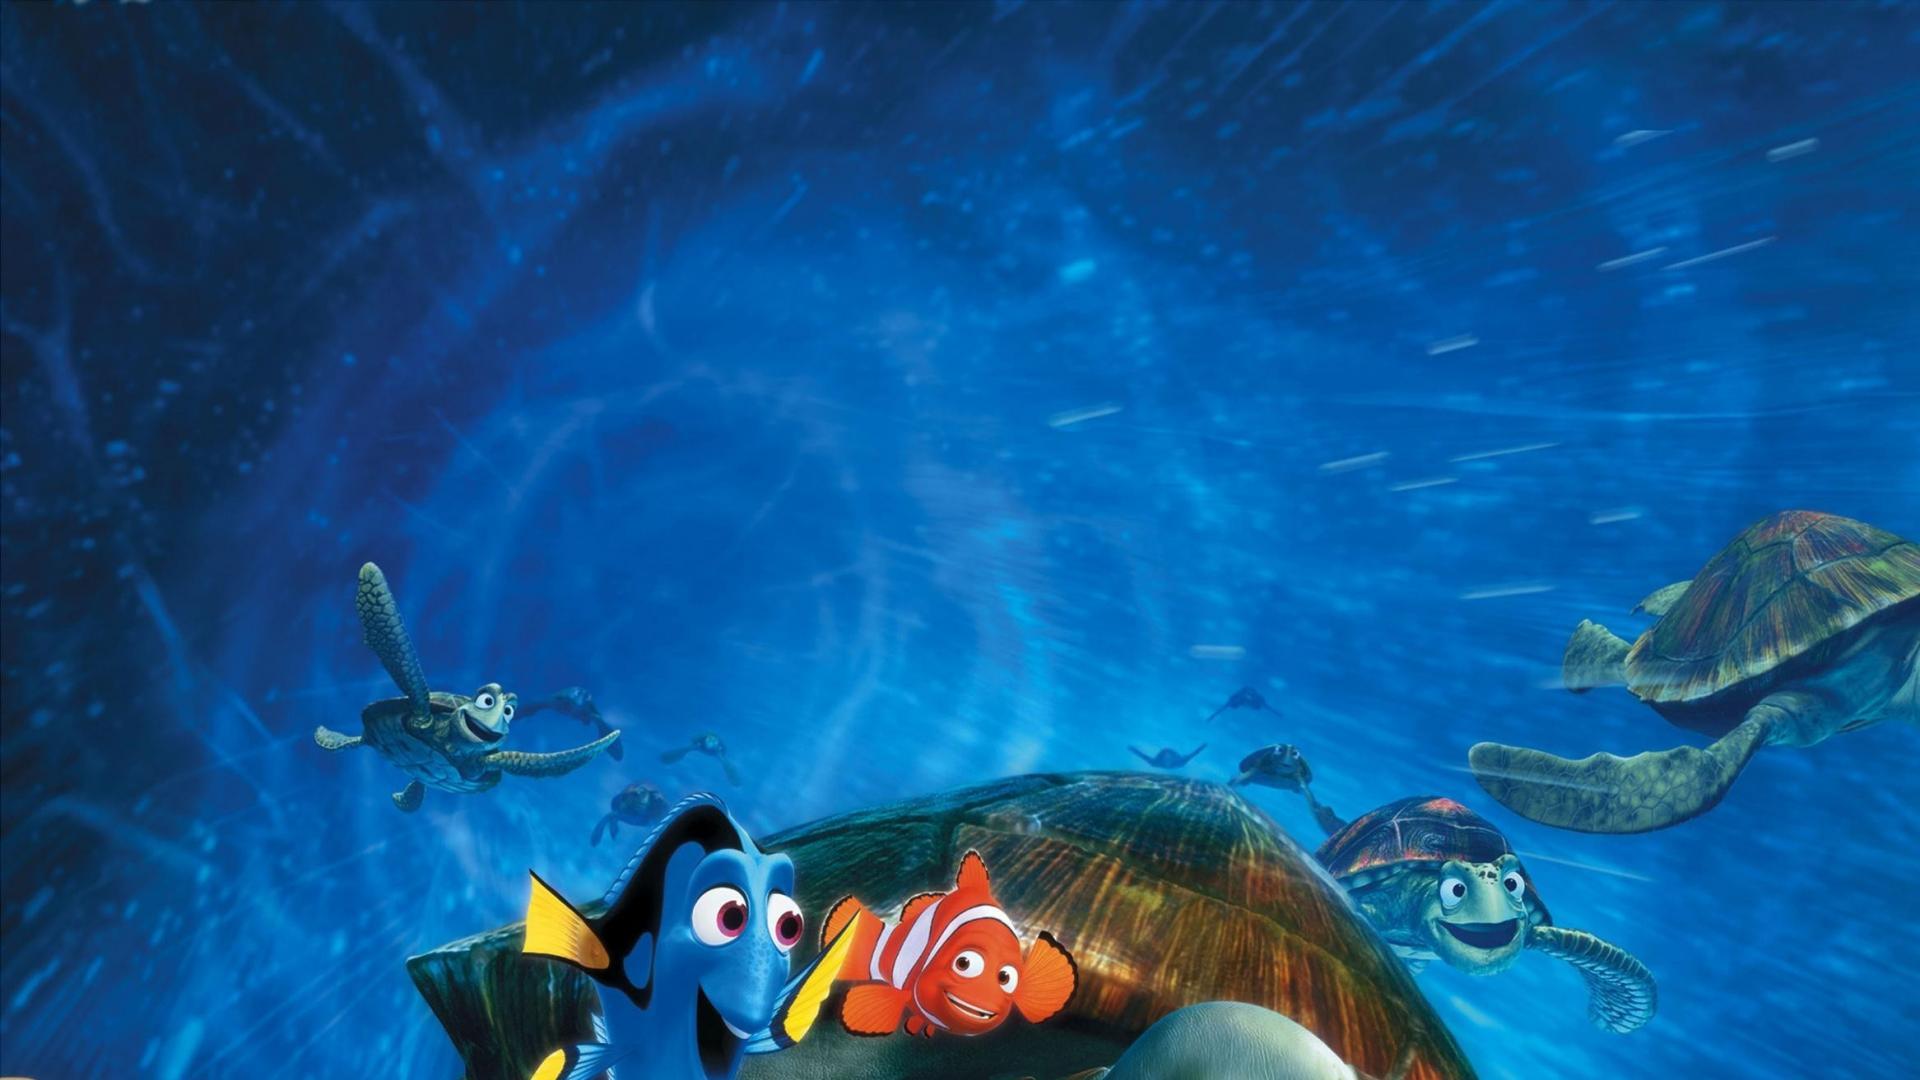 Finding Nemo for apple download